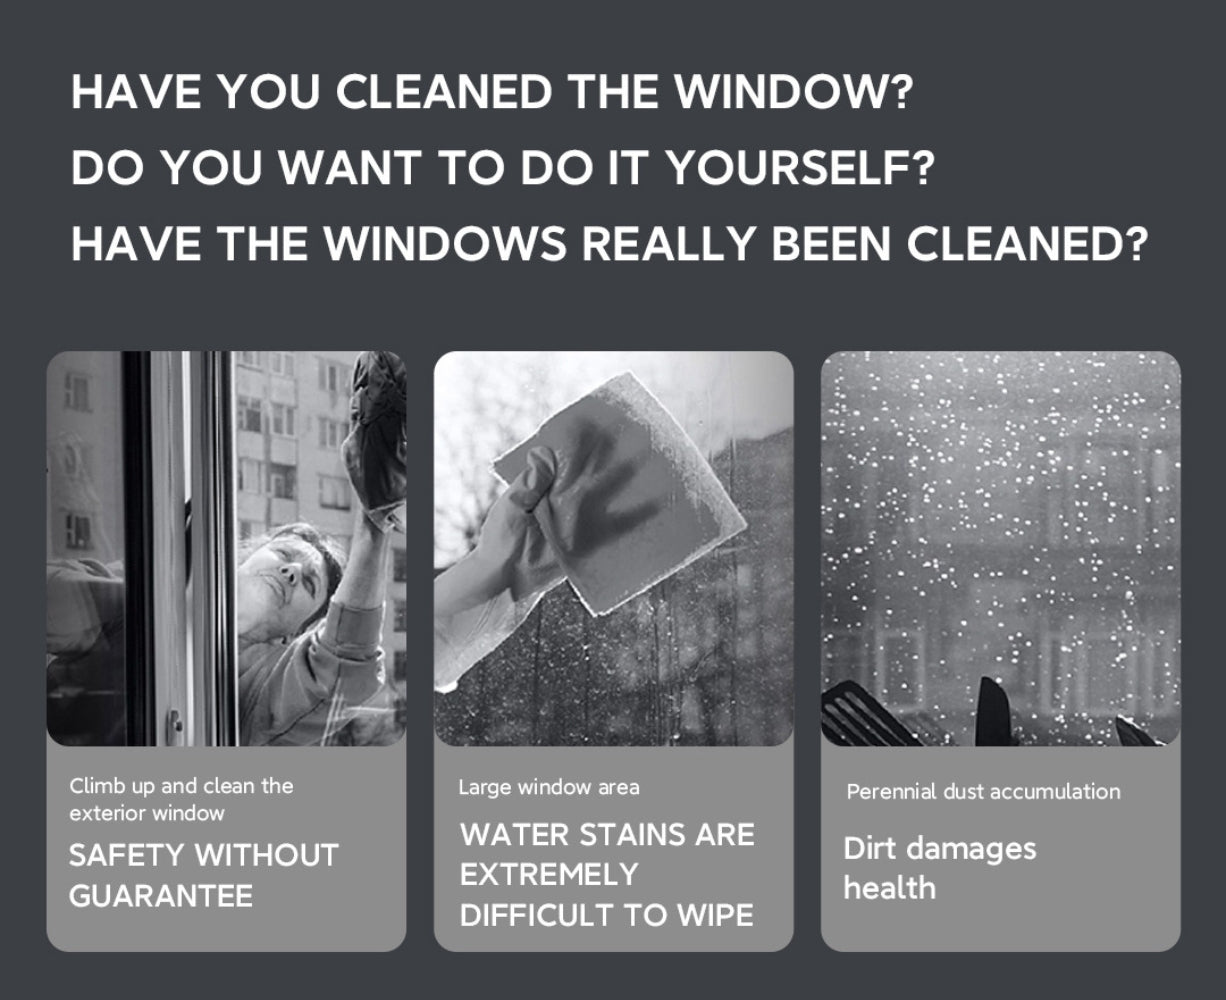 HAVE YOU CLEANED THE WINDOW? DO YOU WANT TO DO IT YOURSELF? HAVE THE WINDOWS REALLY BEEN CLEANED?  ✘ Climb up and clean the exterior window---Safety without guarantee  ✘ Large window area---Water stains are extremely difficult to wipe  ✘ Perennial dust accumulation---Dirt damages health